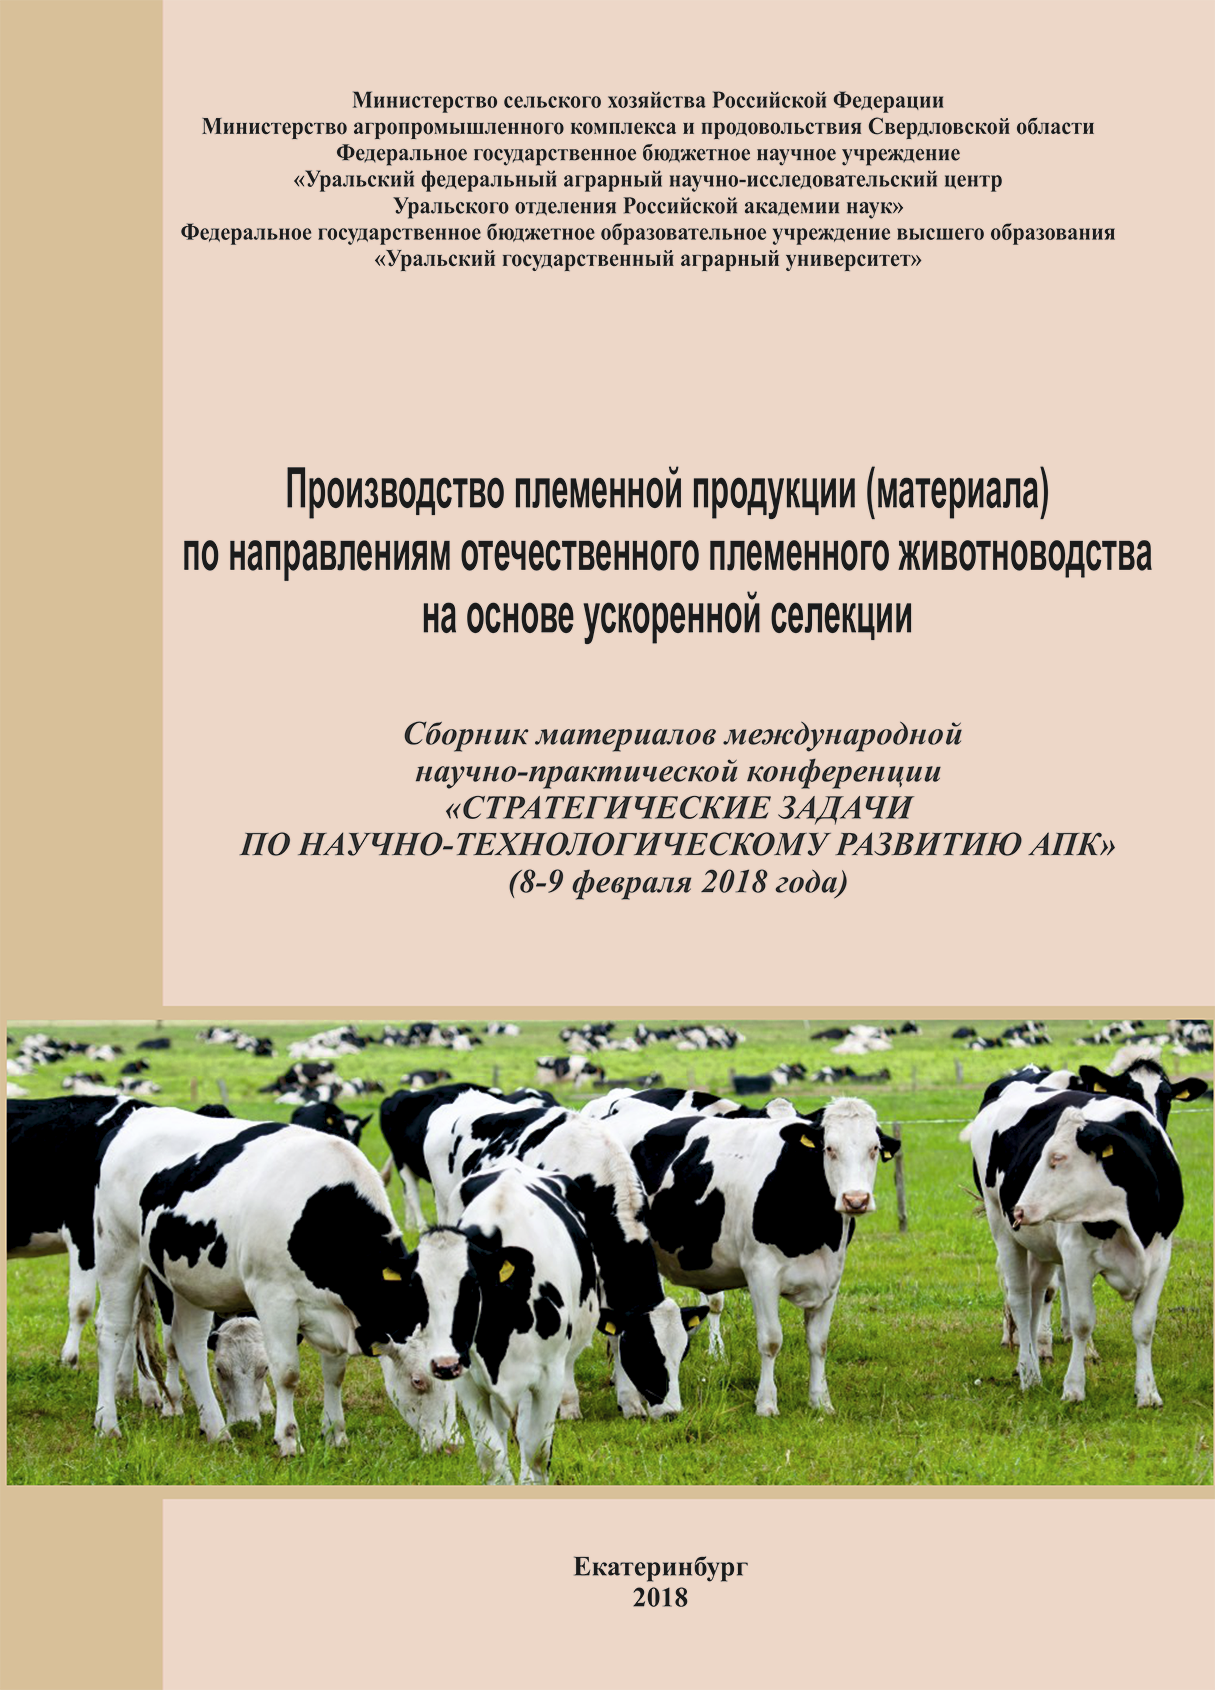                         EVALUATION OF THE EFFICIENCY OF AGRICULTURAL PRODUCTION ON THE AMOUNT OF STATE SUPPORT PROGRAMMES AND DEVELOPMENT ACTIVITIES  AGRICULTURE
            